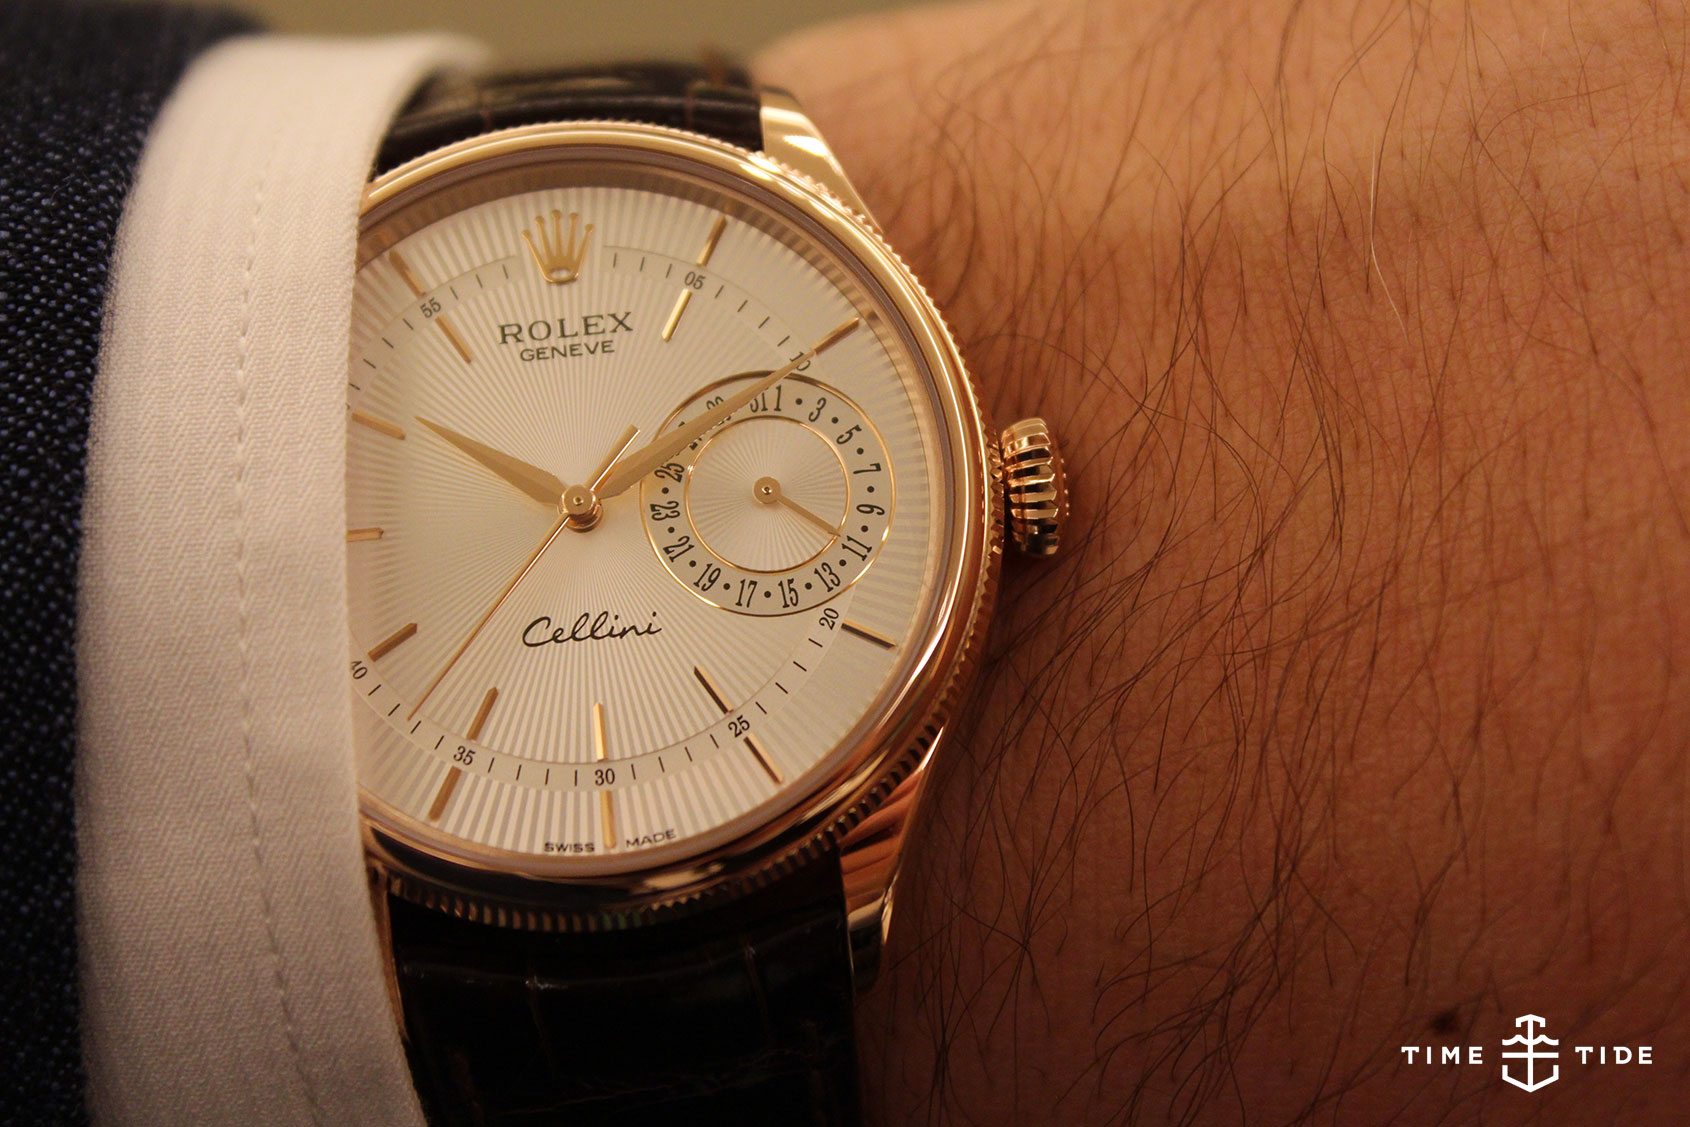 Rolex 2014 Cellini Collection – First Look